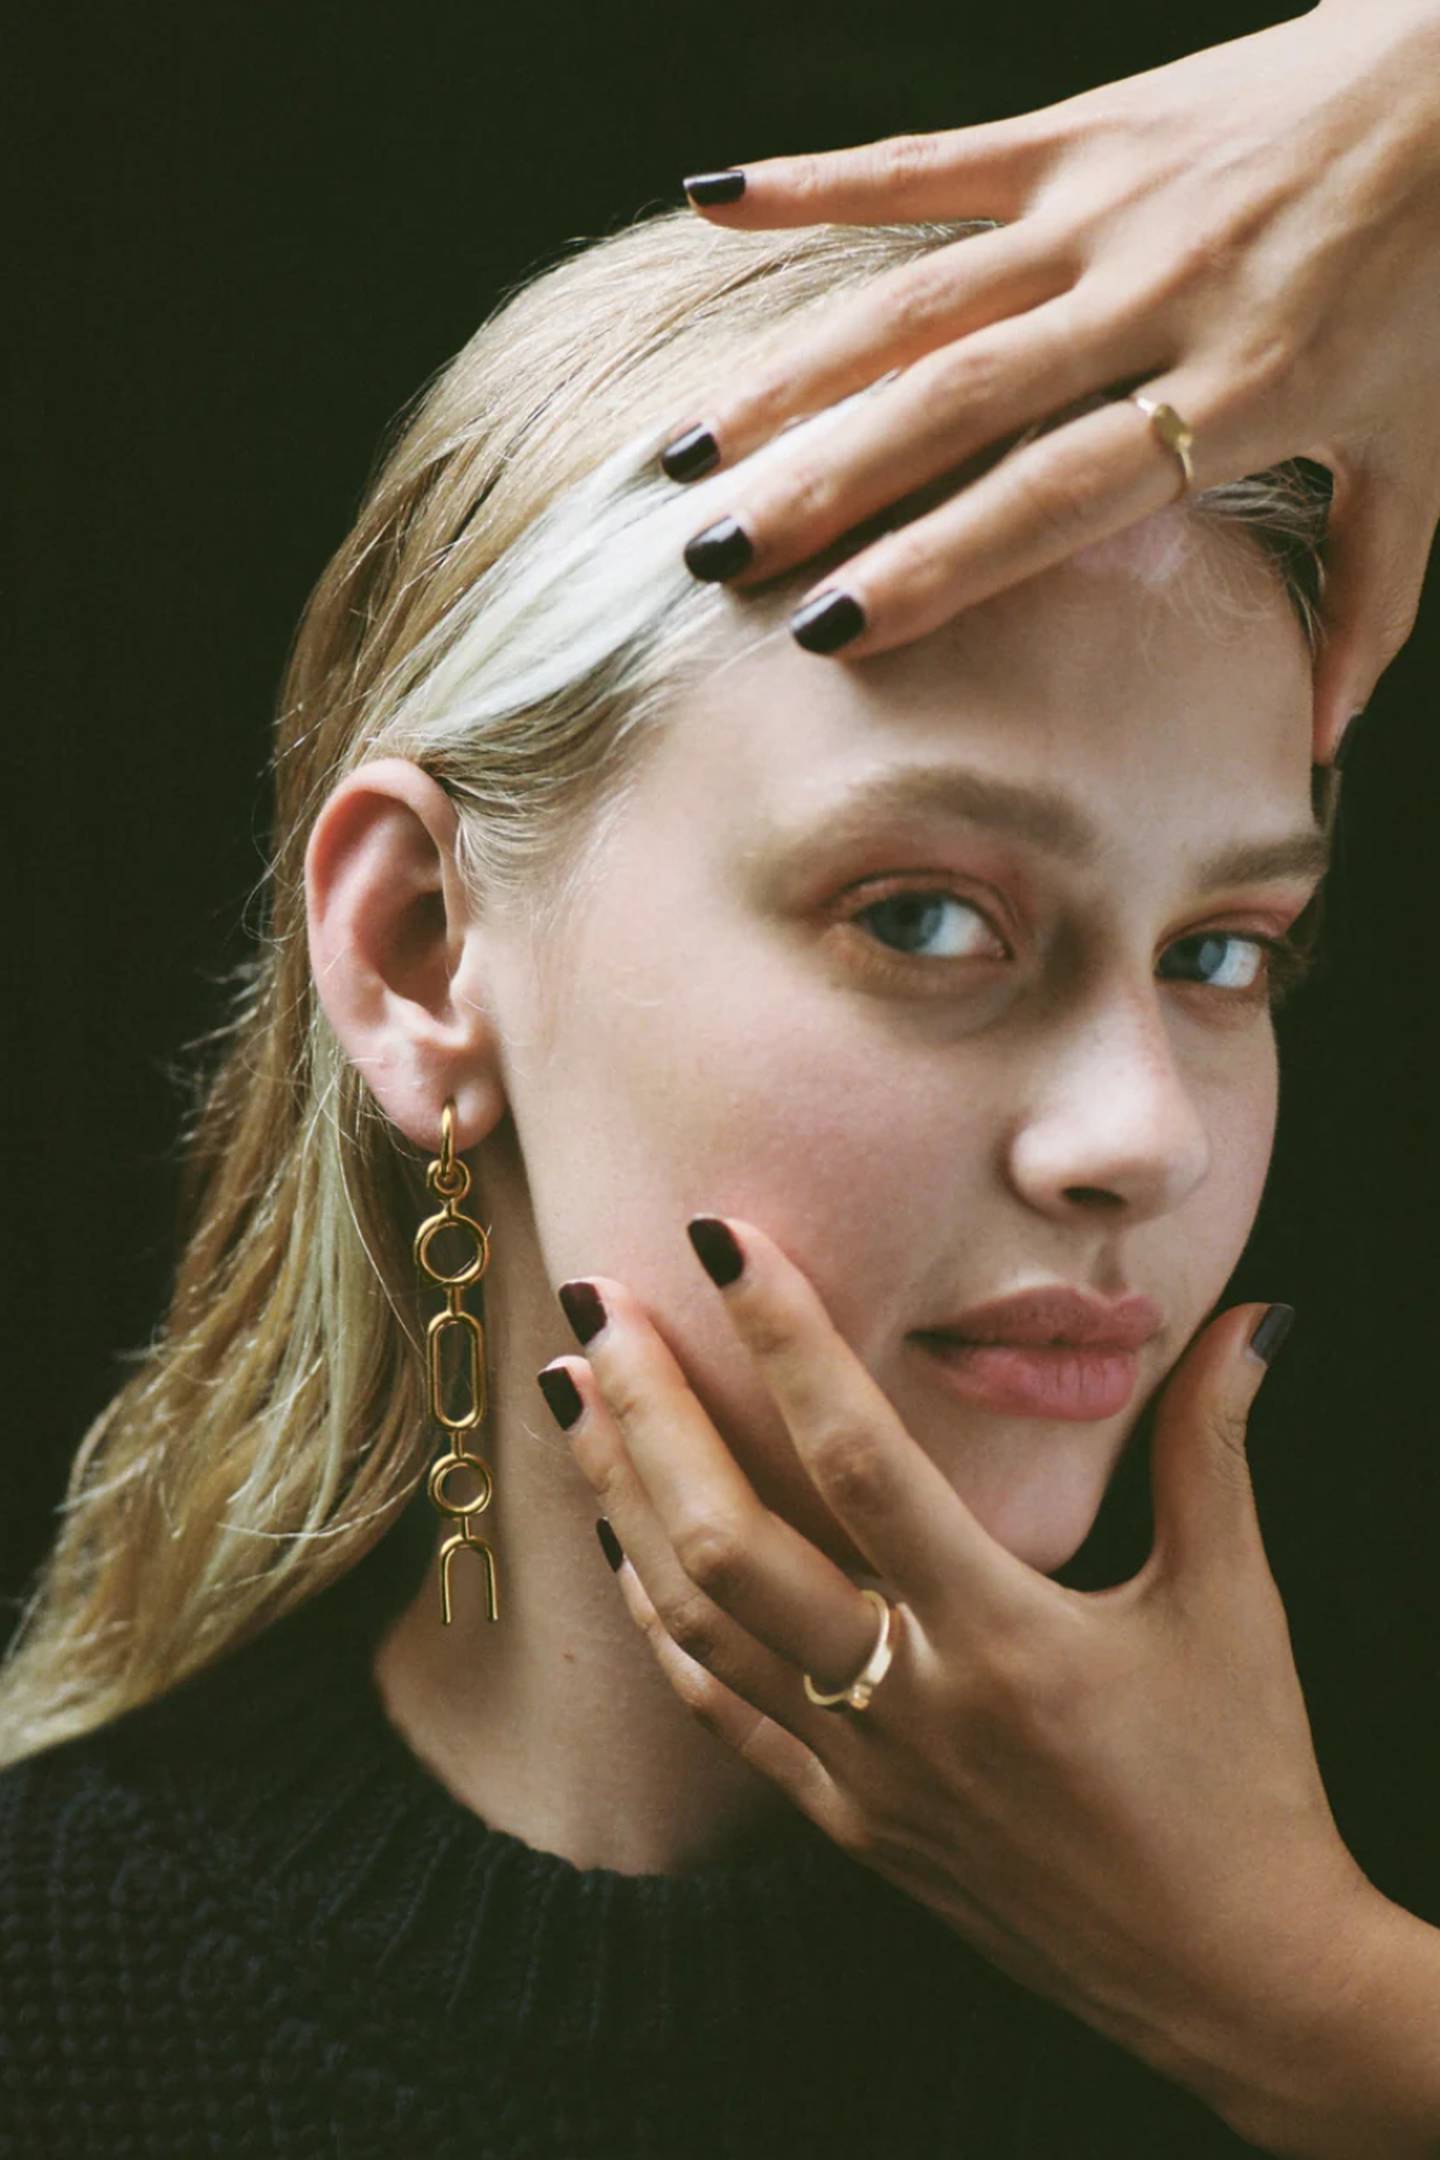 A model wears gold-plated hoops made from recycled materials.